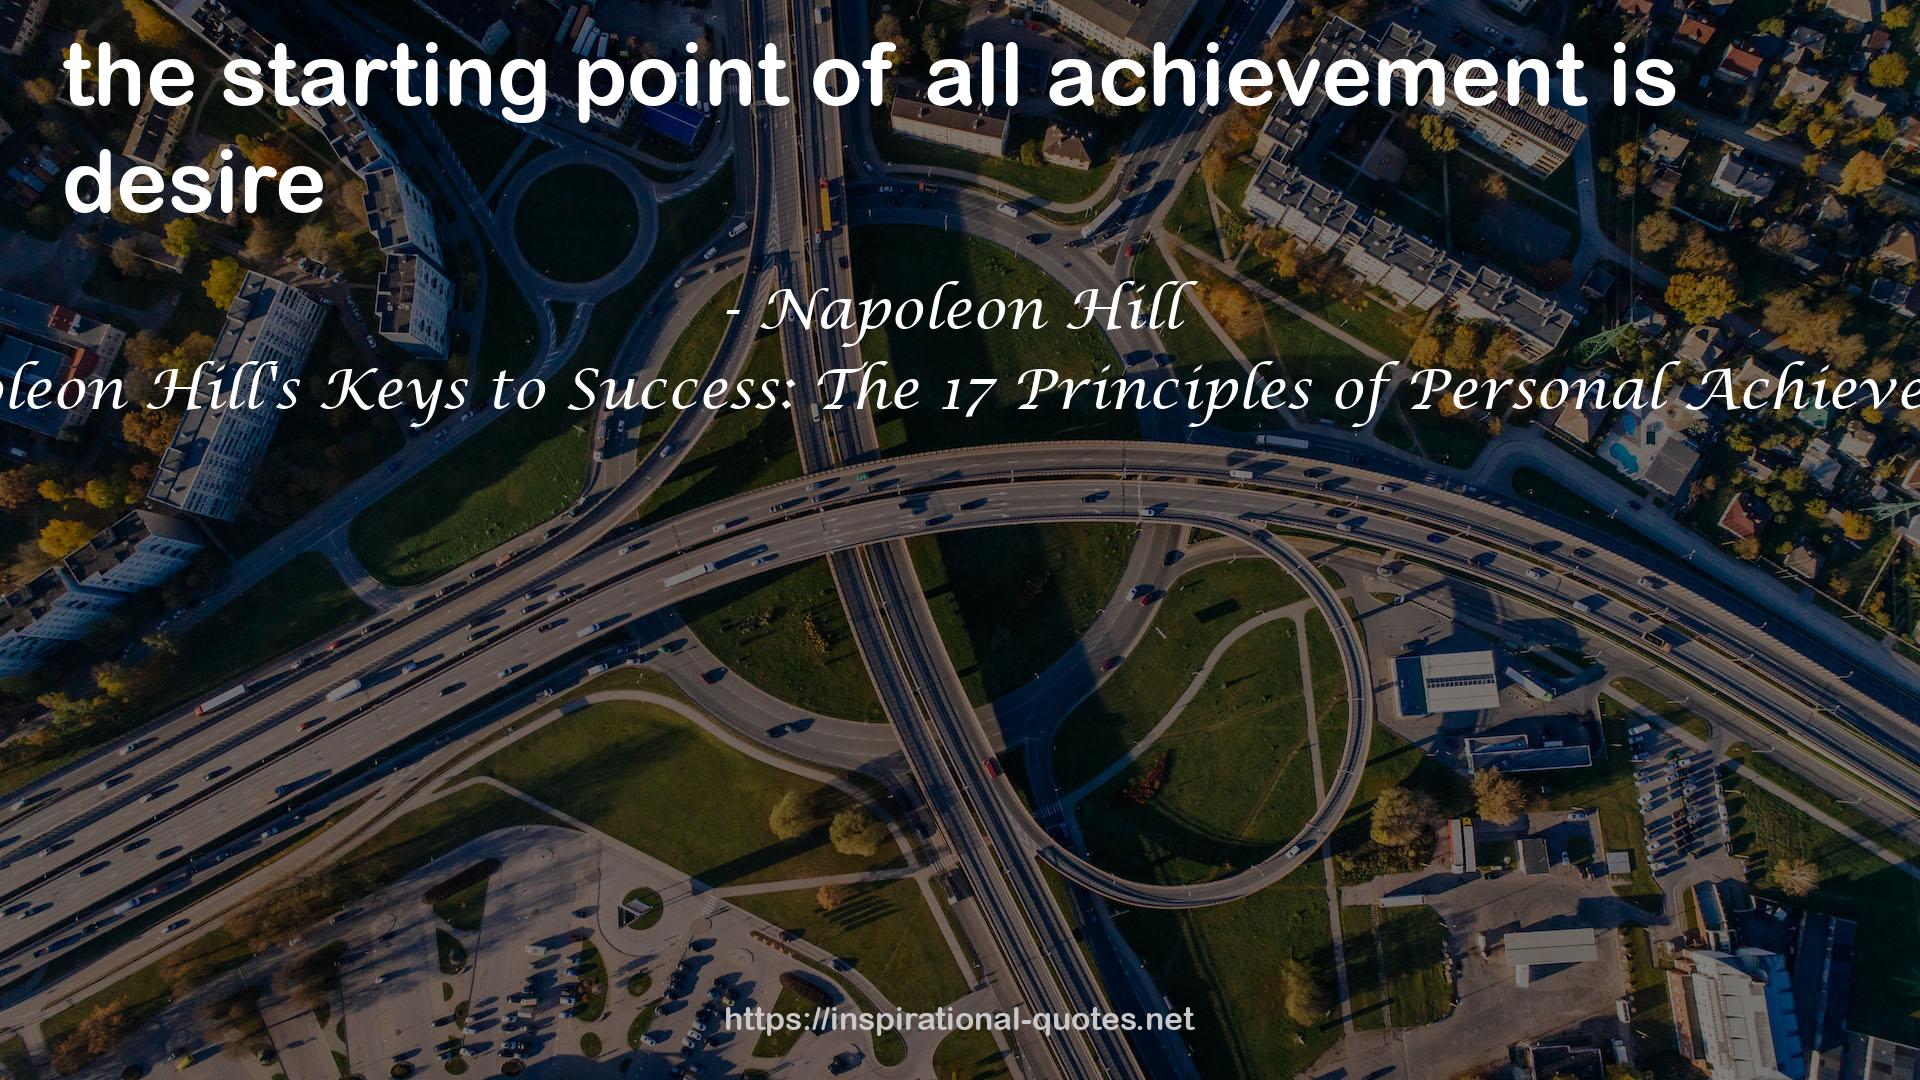 Napoleon Hill's Keys to Success: The 17 Principles of Personal Achievement QUOTES